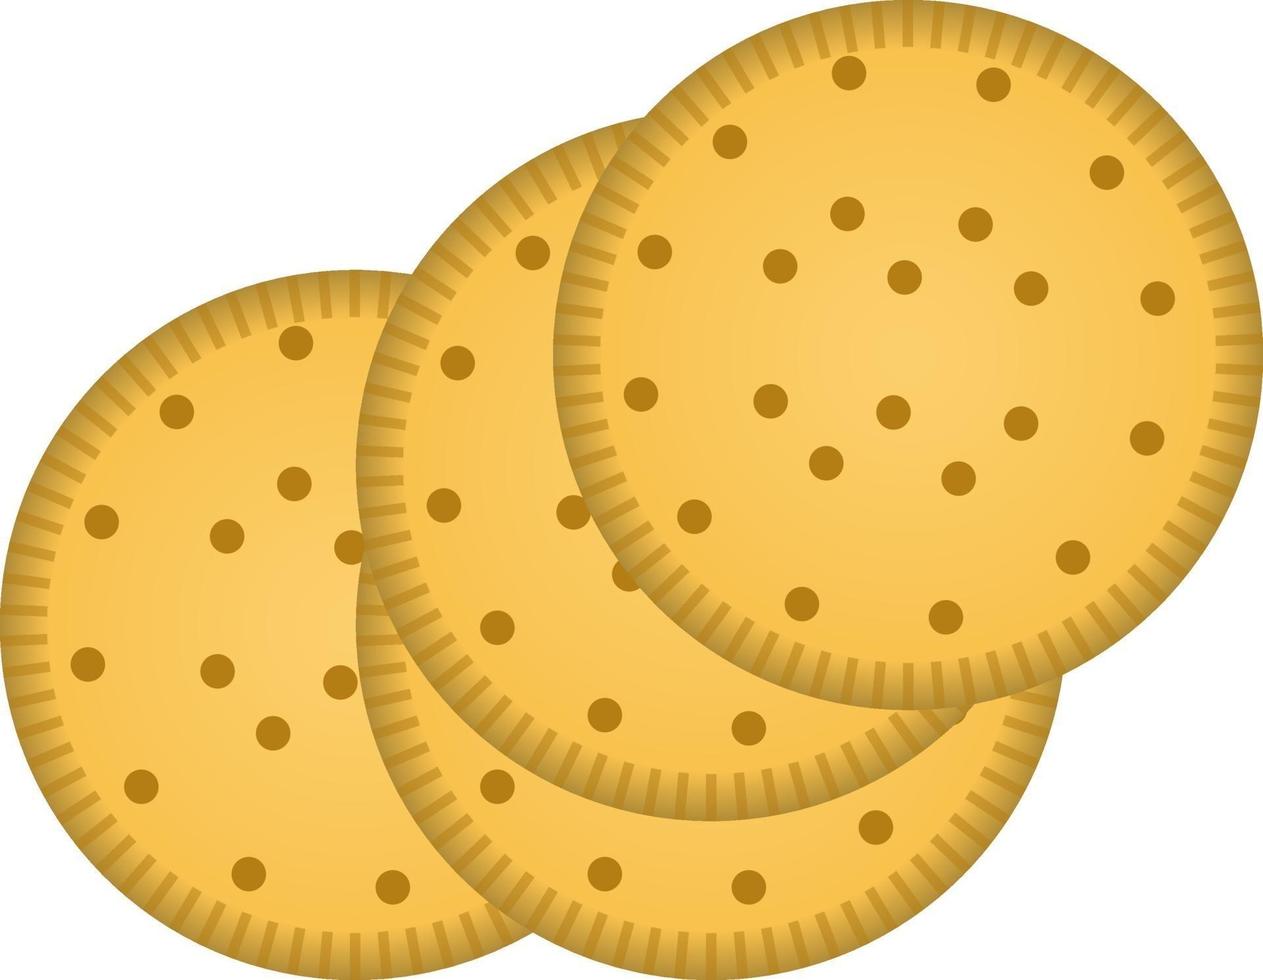 Small crackers, illustration, vector on a white background.